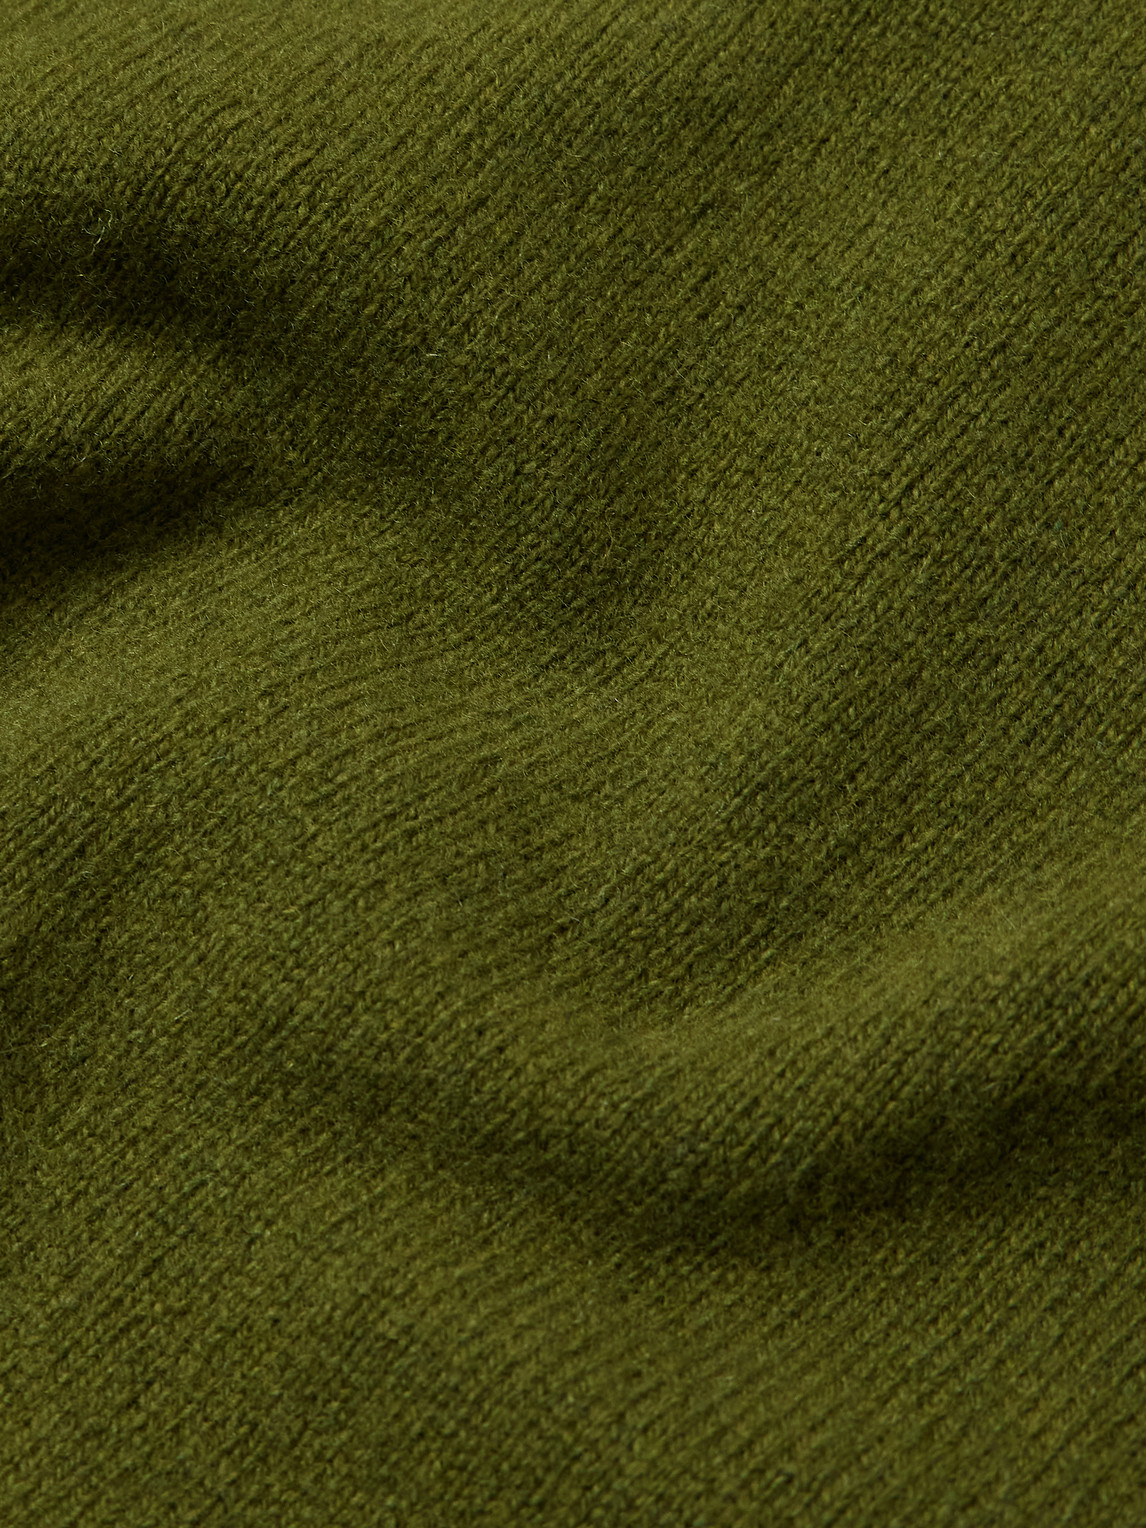 Shop De Petrillo Slim-fit Wool And Cashmere-blend Sweater In Green